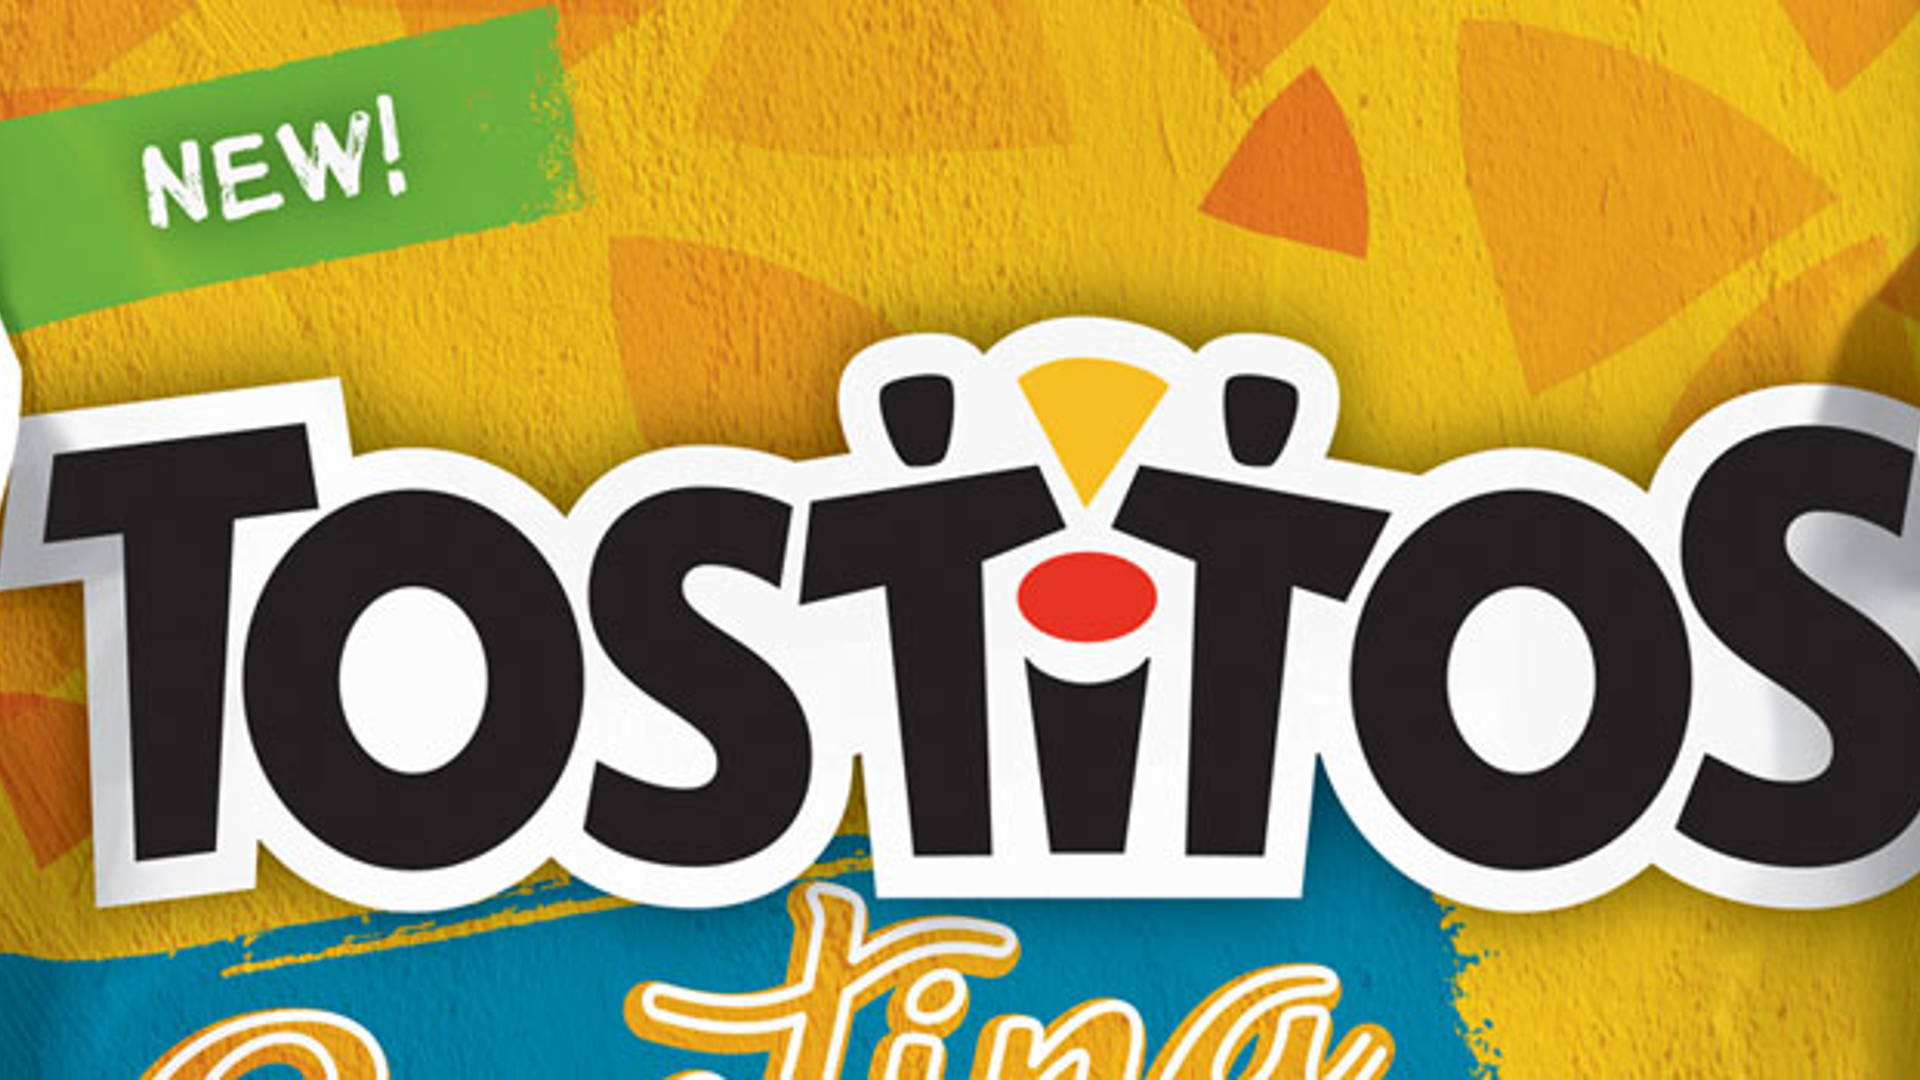 Featured image for Before & After: Tostitos